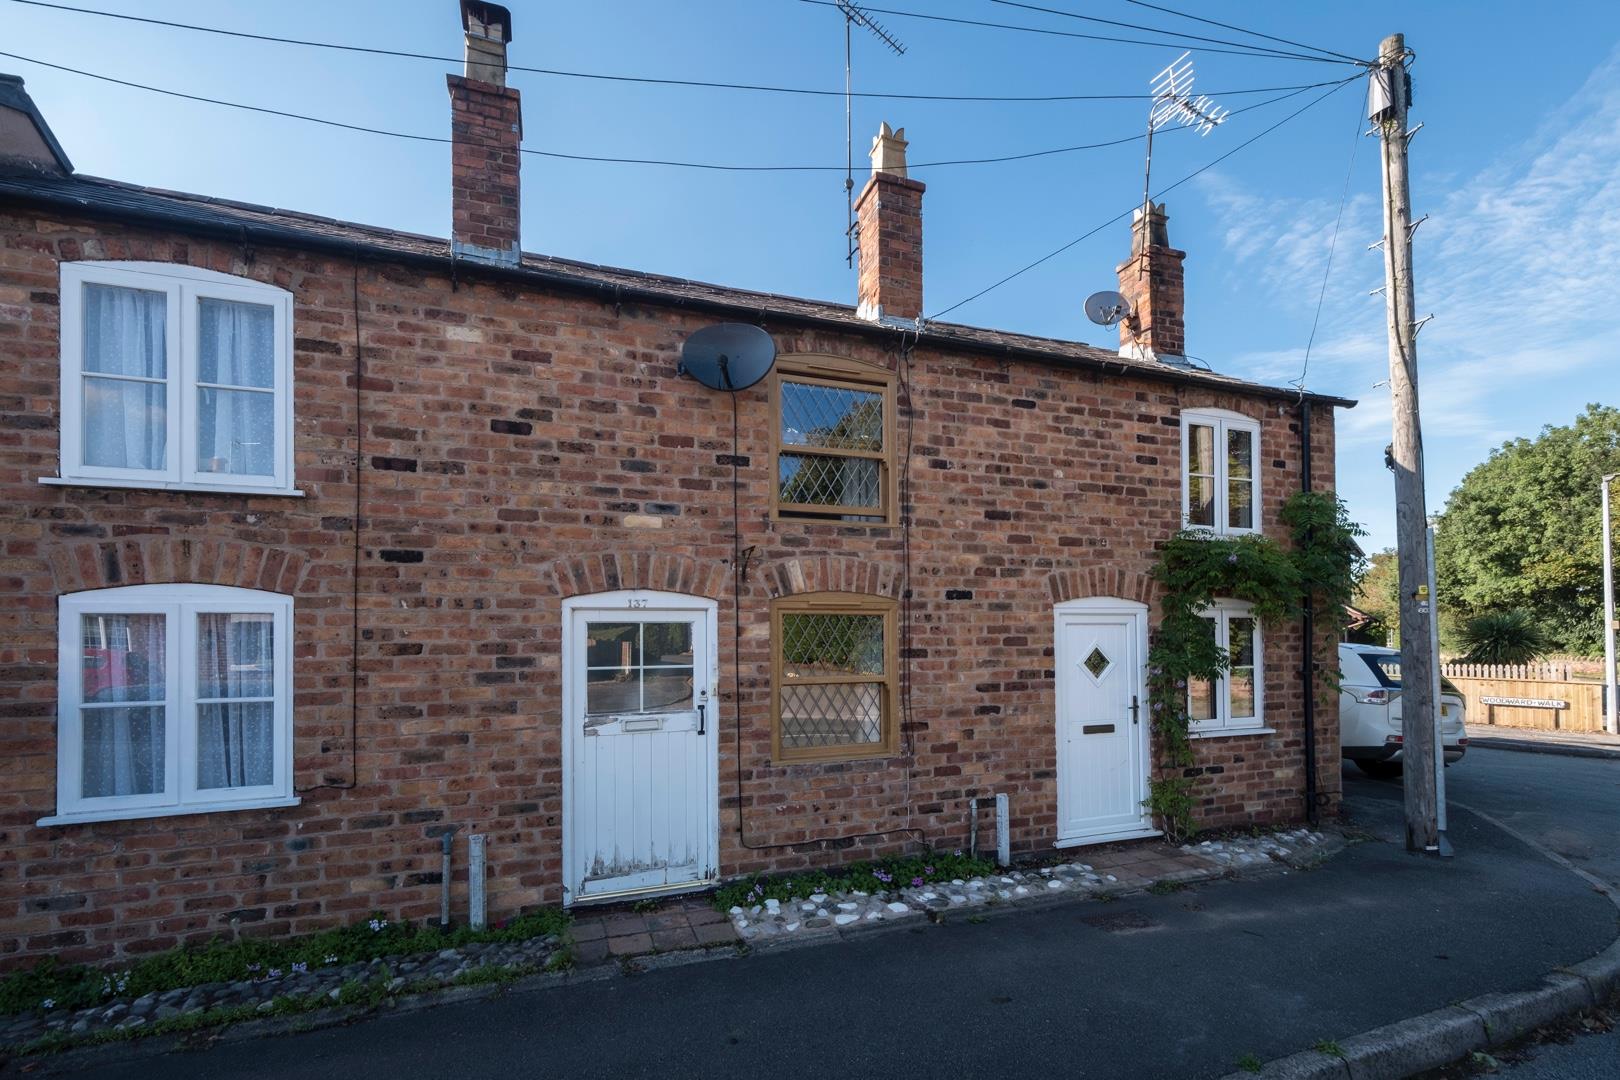 2 bedroom  Terraced House for Sale in Tarvin